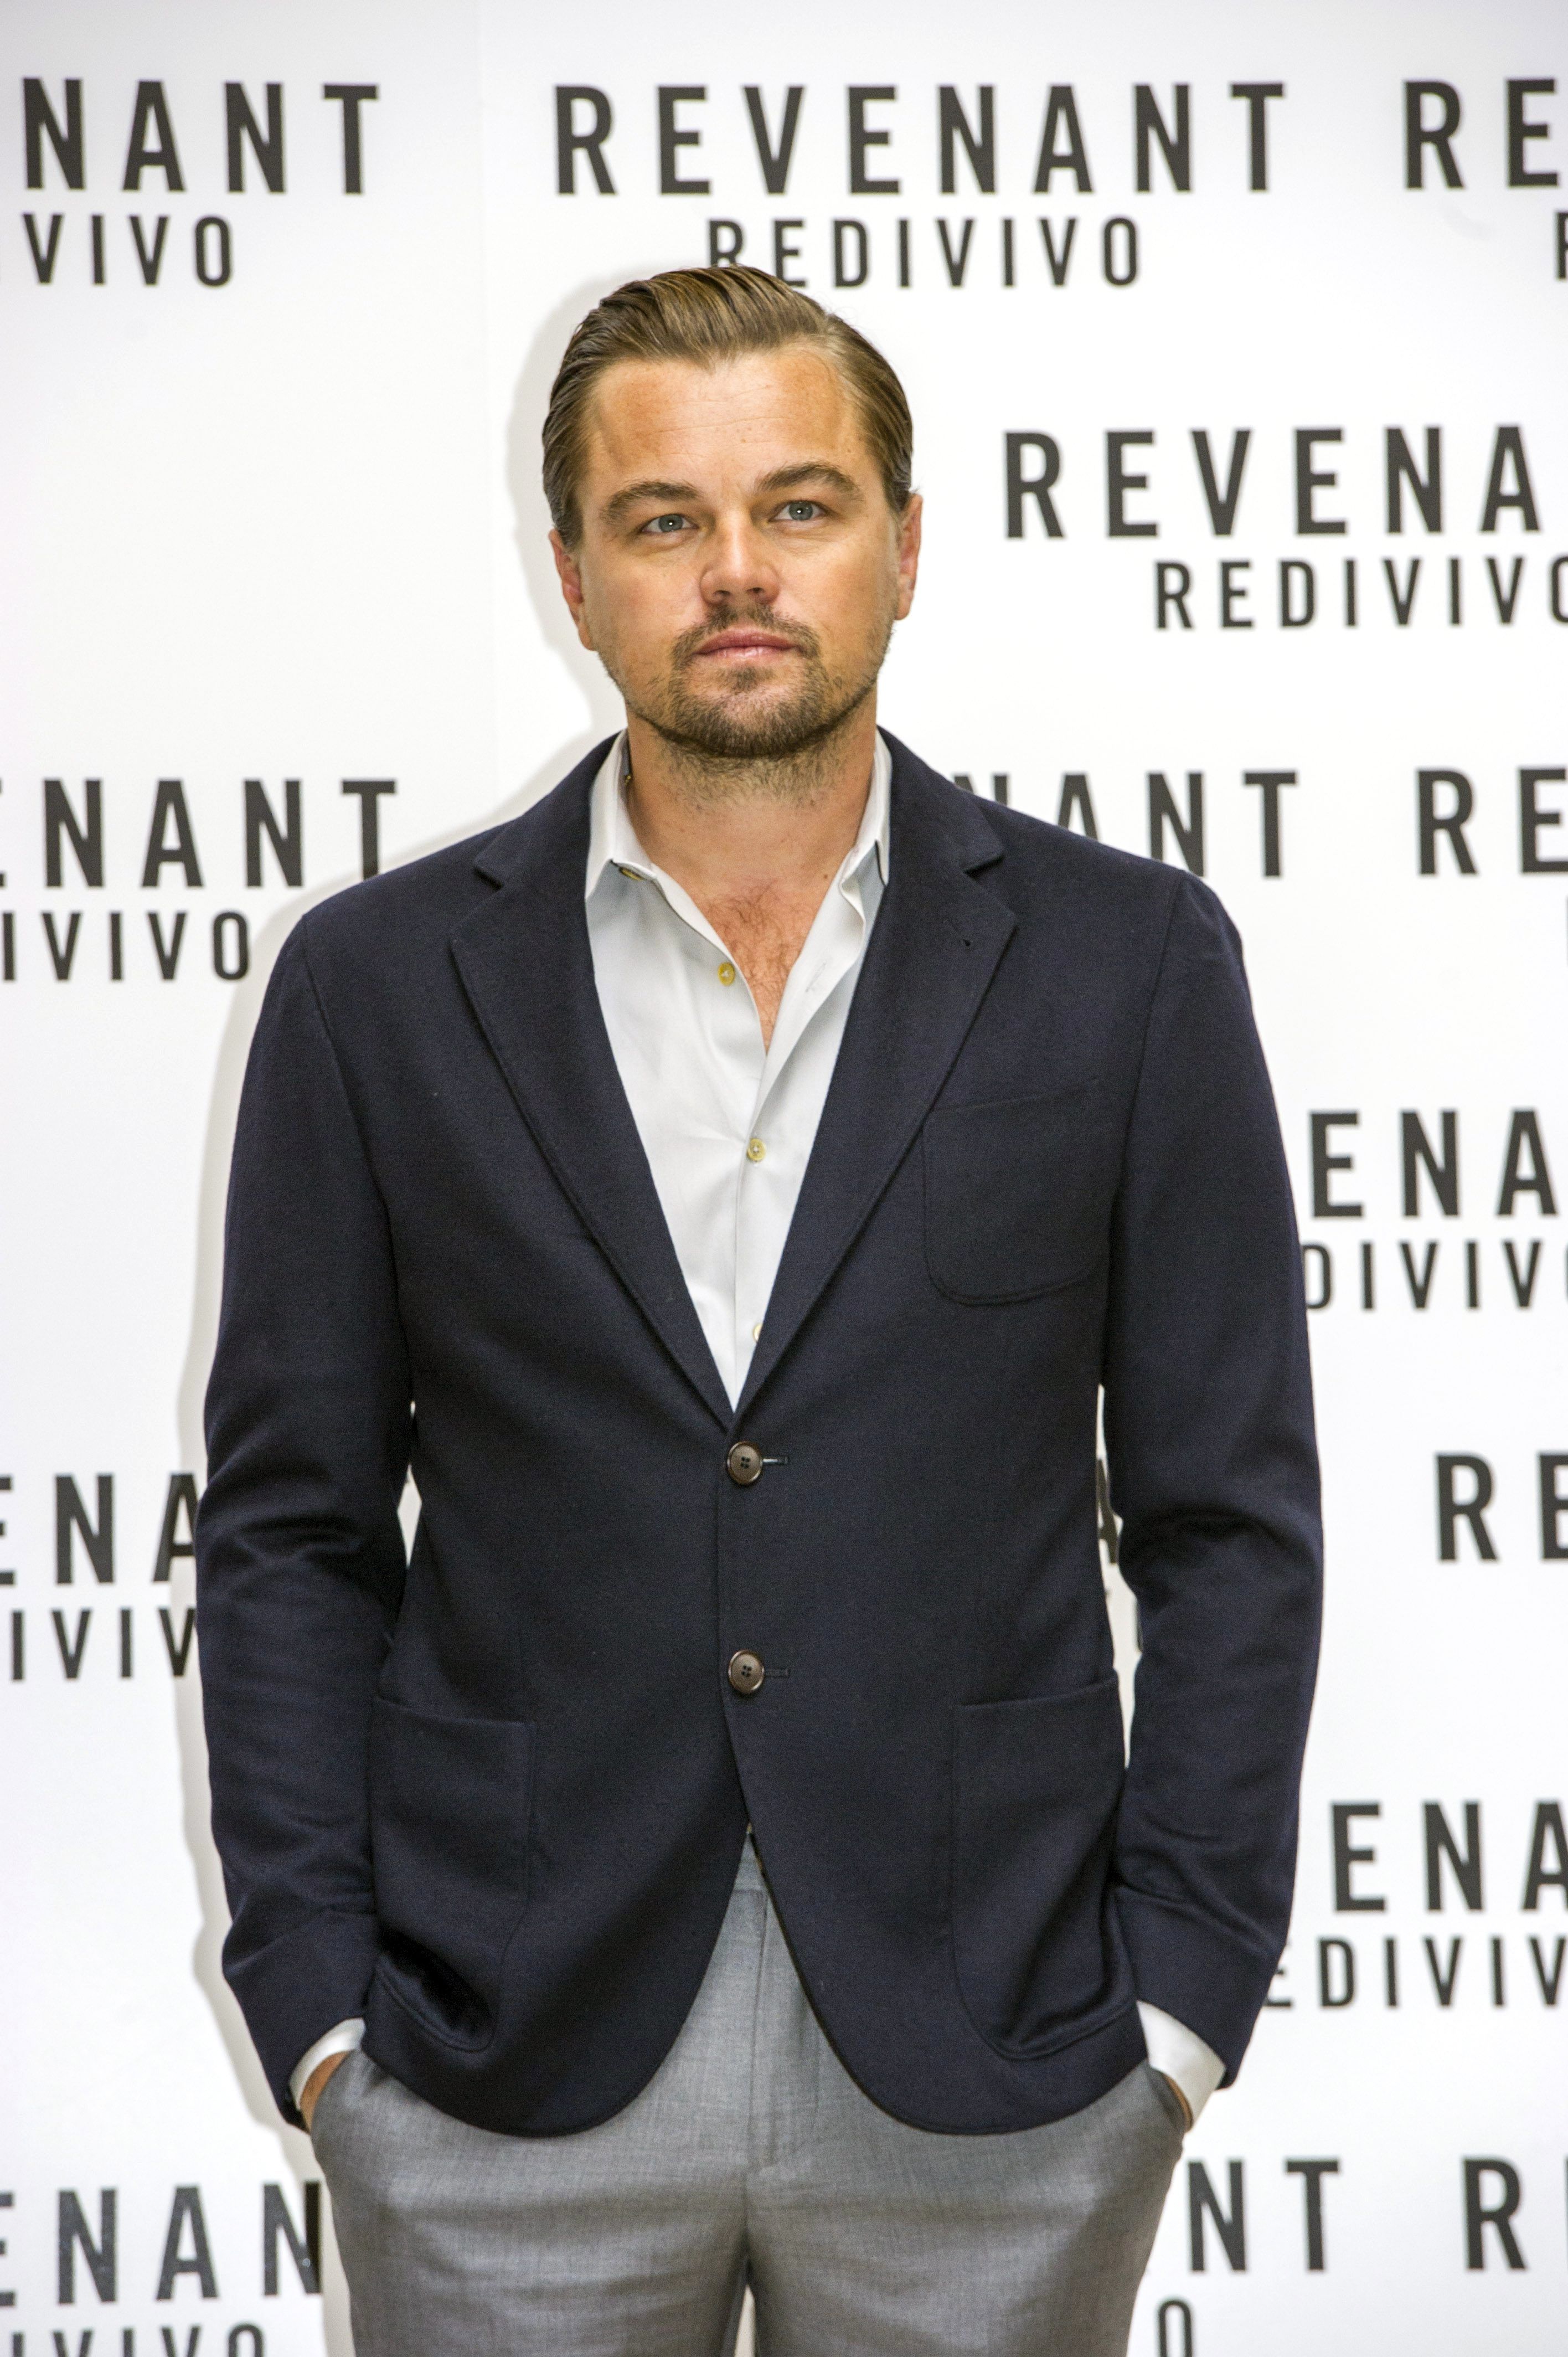 10 Things You Didn’t Know About Leonardo DiCaprio